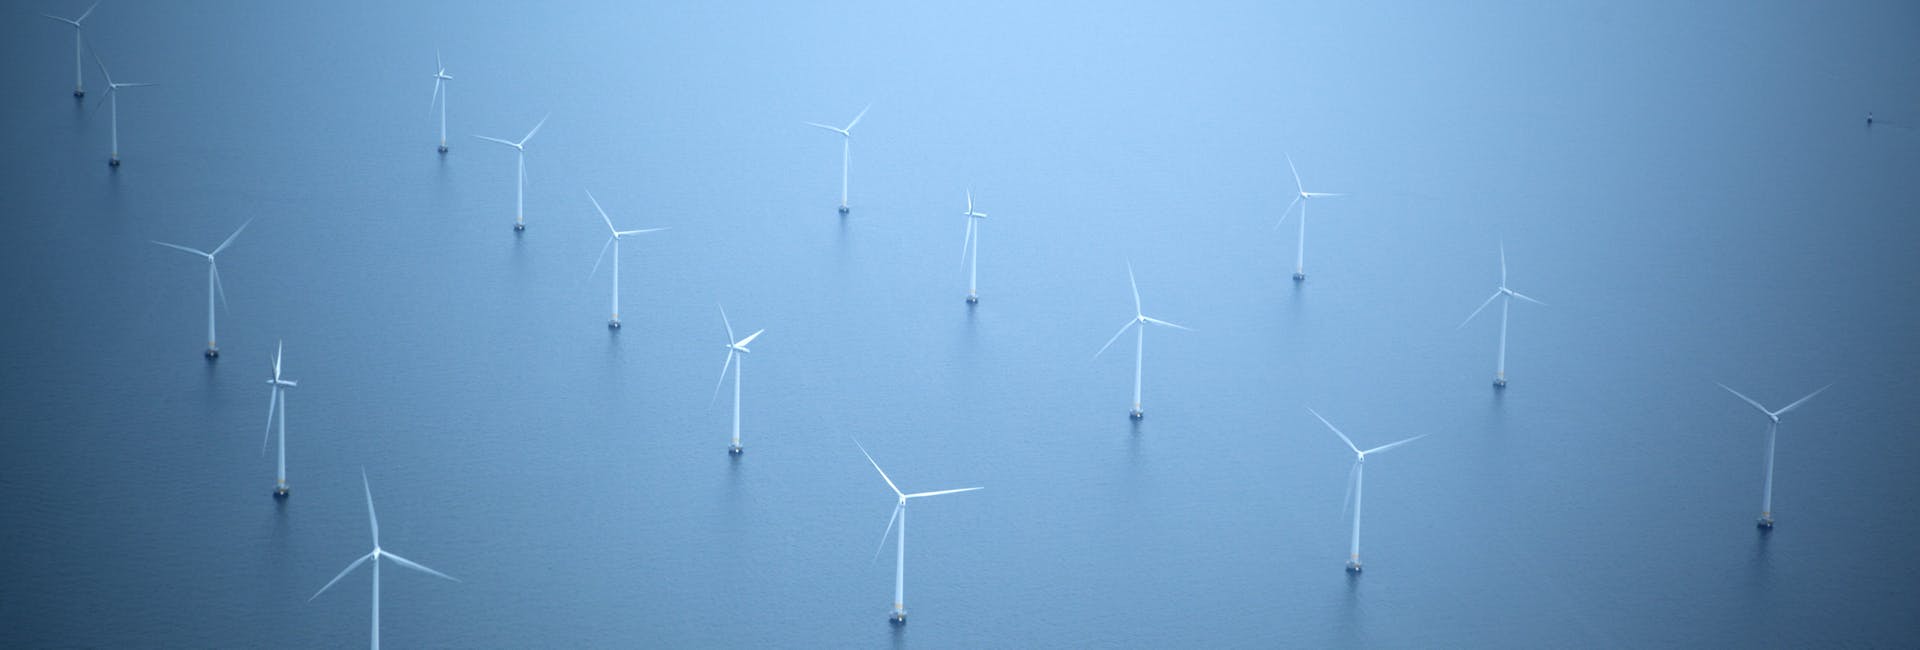 White wind turbines in the middle of the sea, with a boat in the background